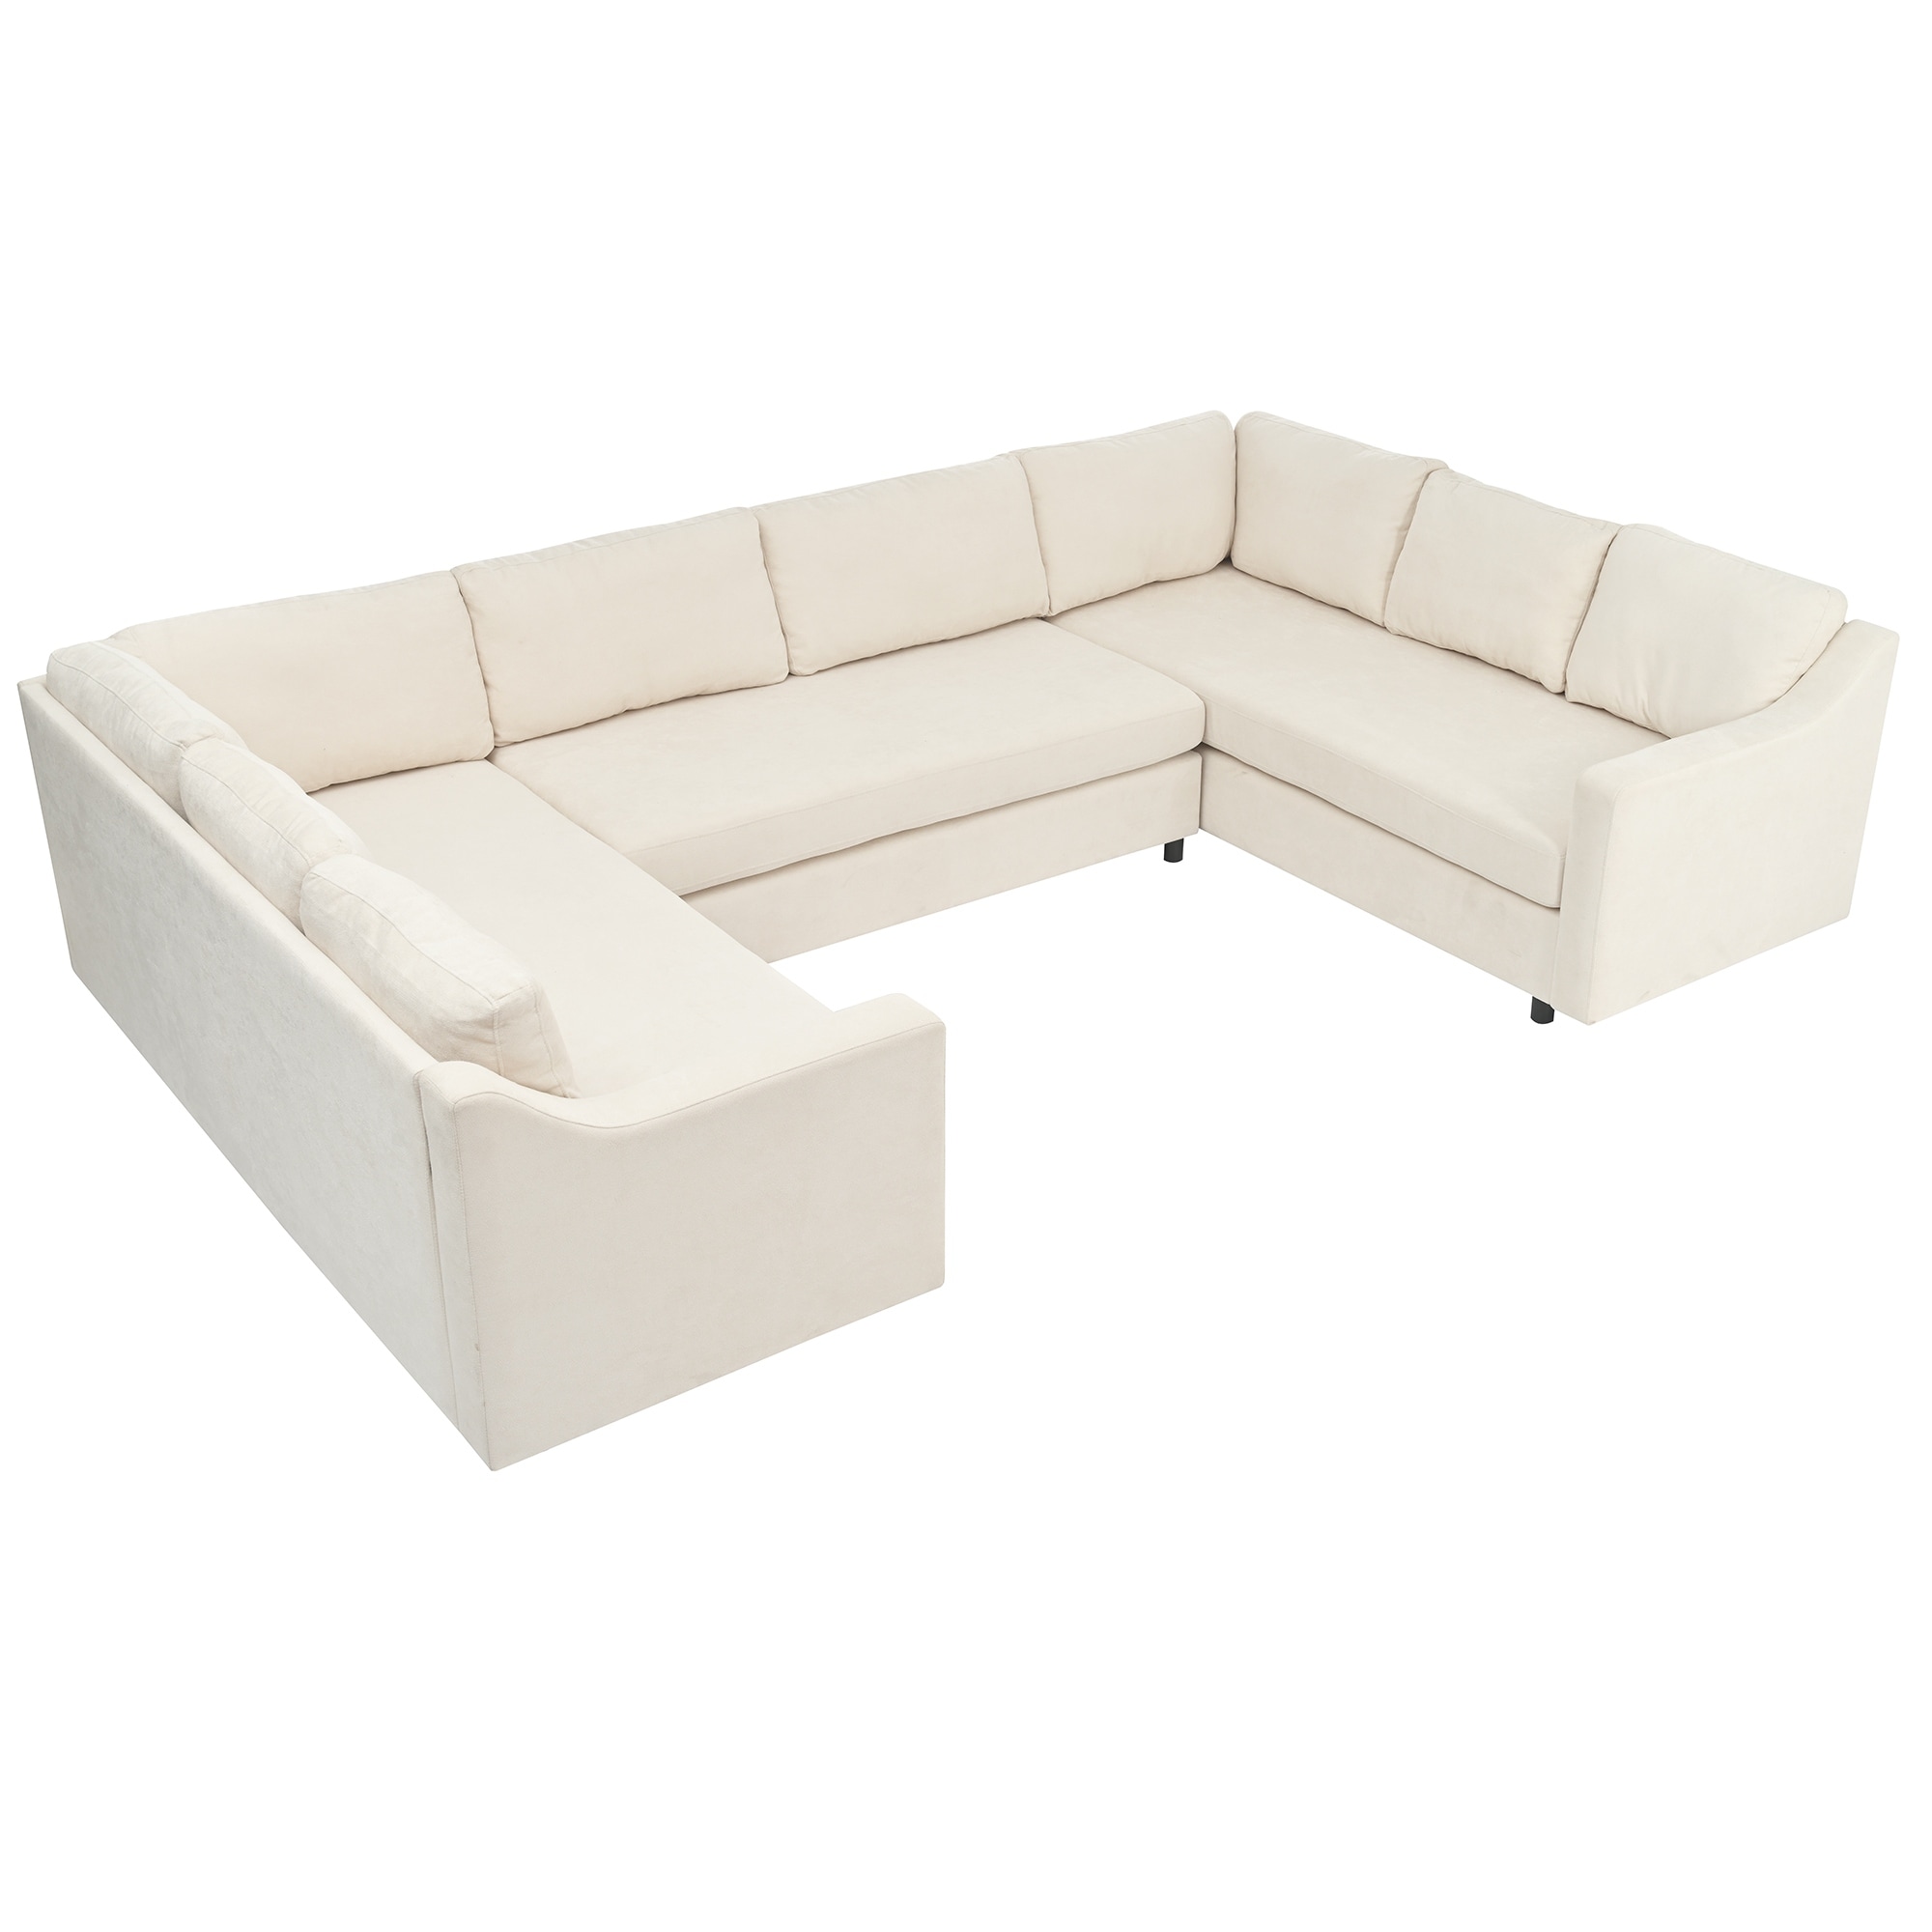 Removable Cushions Couch Set for Living Room U-shape Sectional Sofa Set  with Back Cushions and Wood Frame(Set of 3) - Bed Bath & Beyond - 39008968